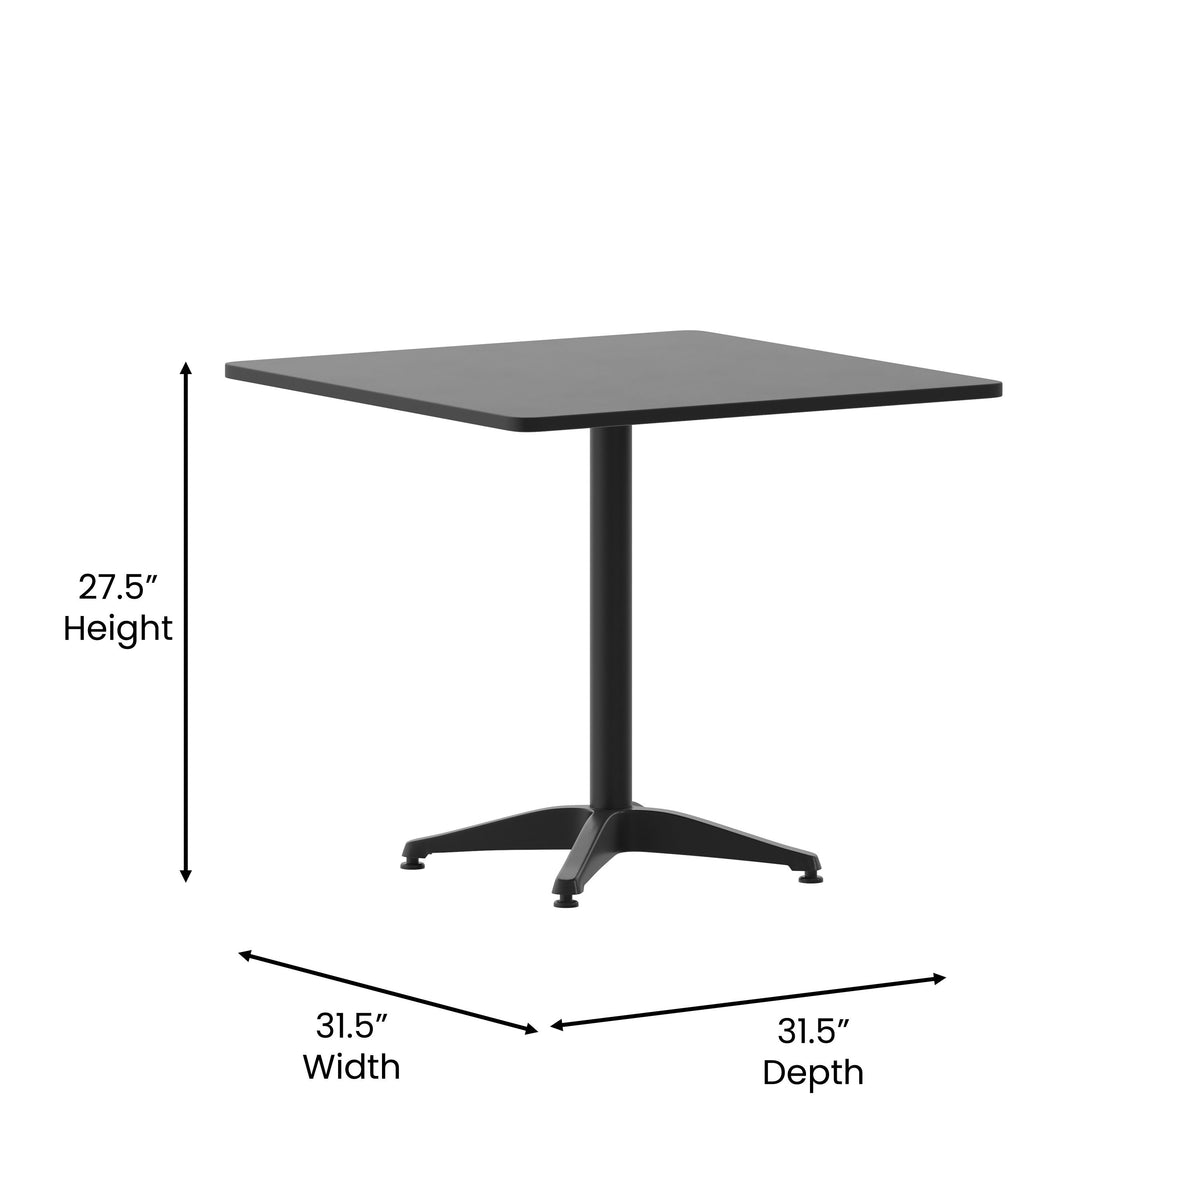 Black |#| Modern 31.5inch Square Glass Framed Glass Table with 4 Black Slat Back Chairs